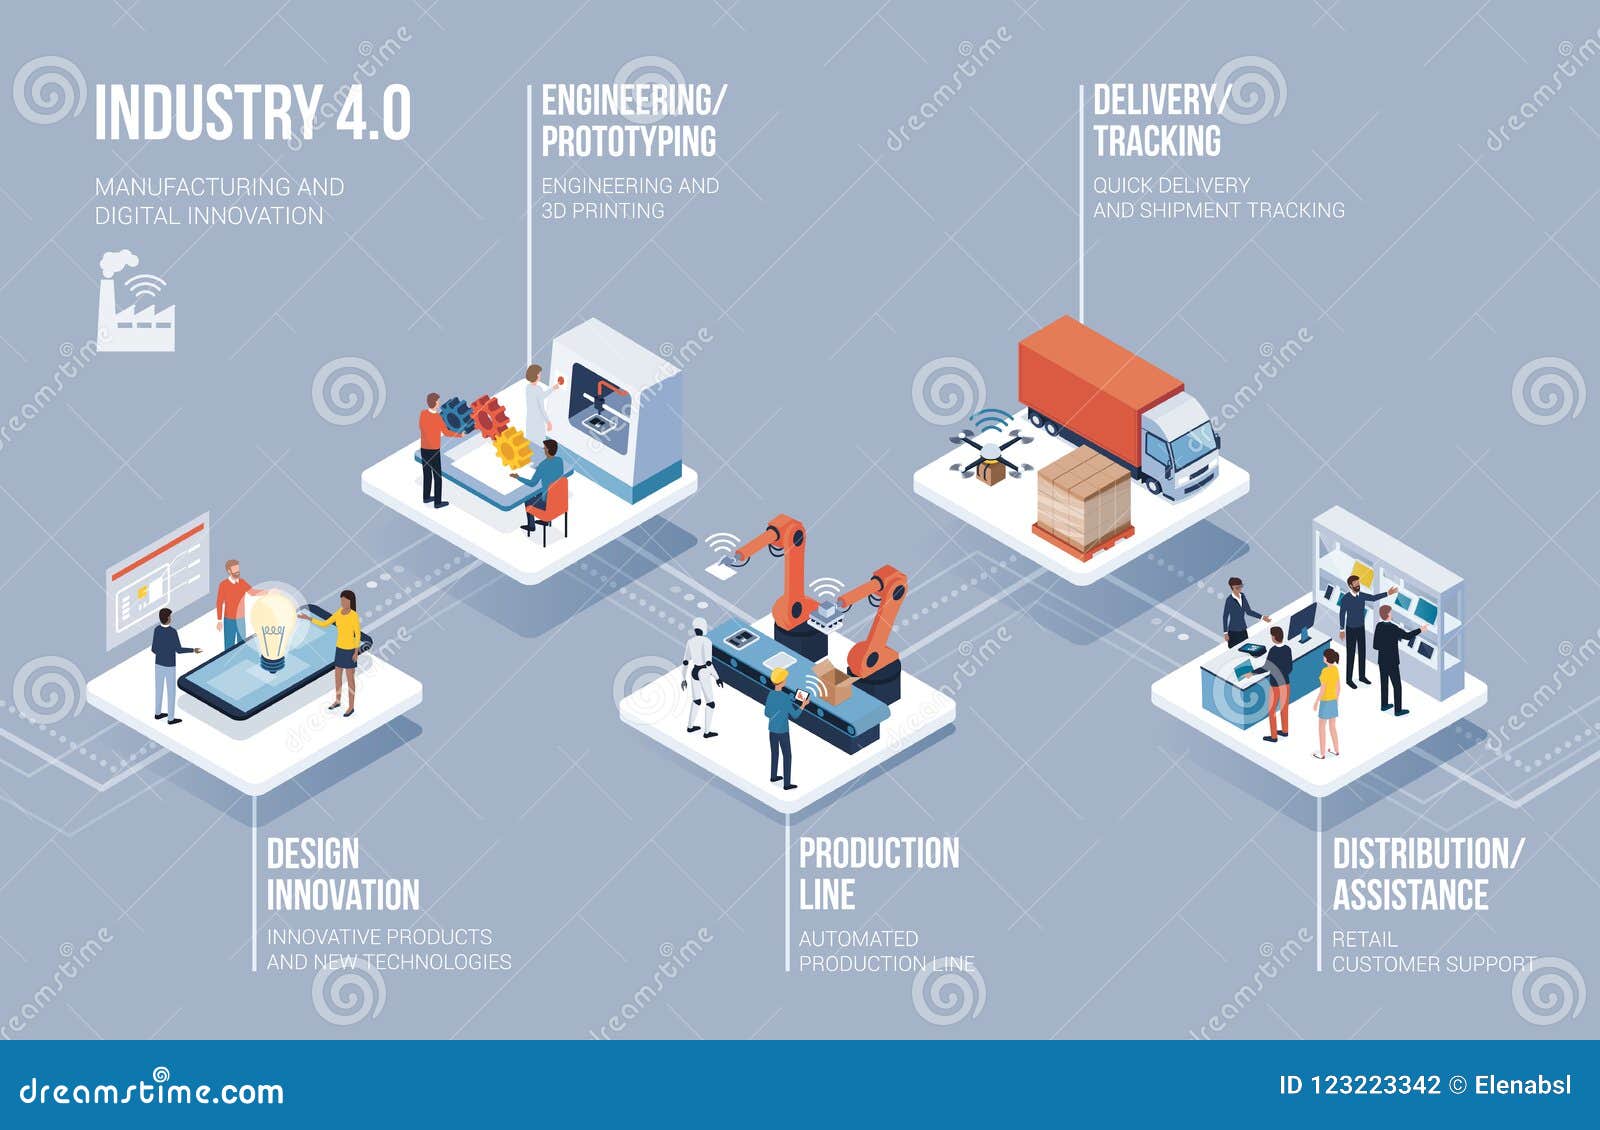 industry 4.0, automation and innovation infographic